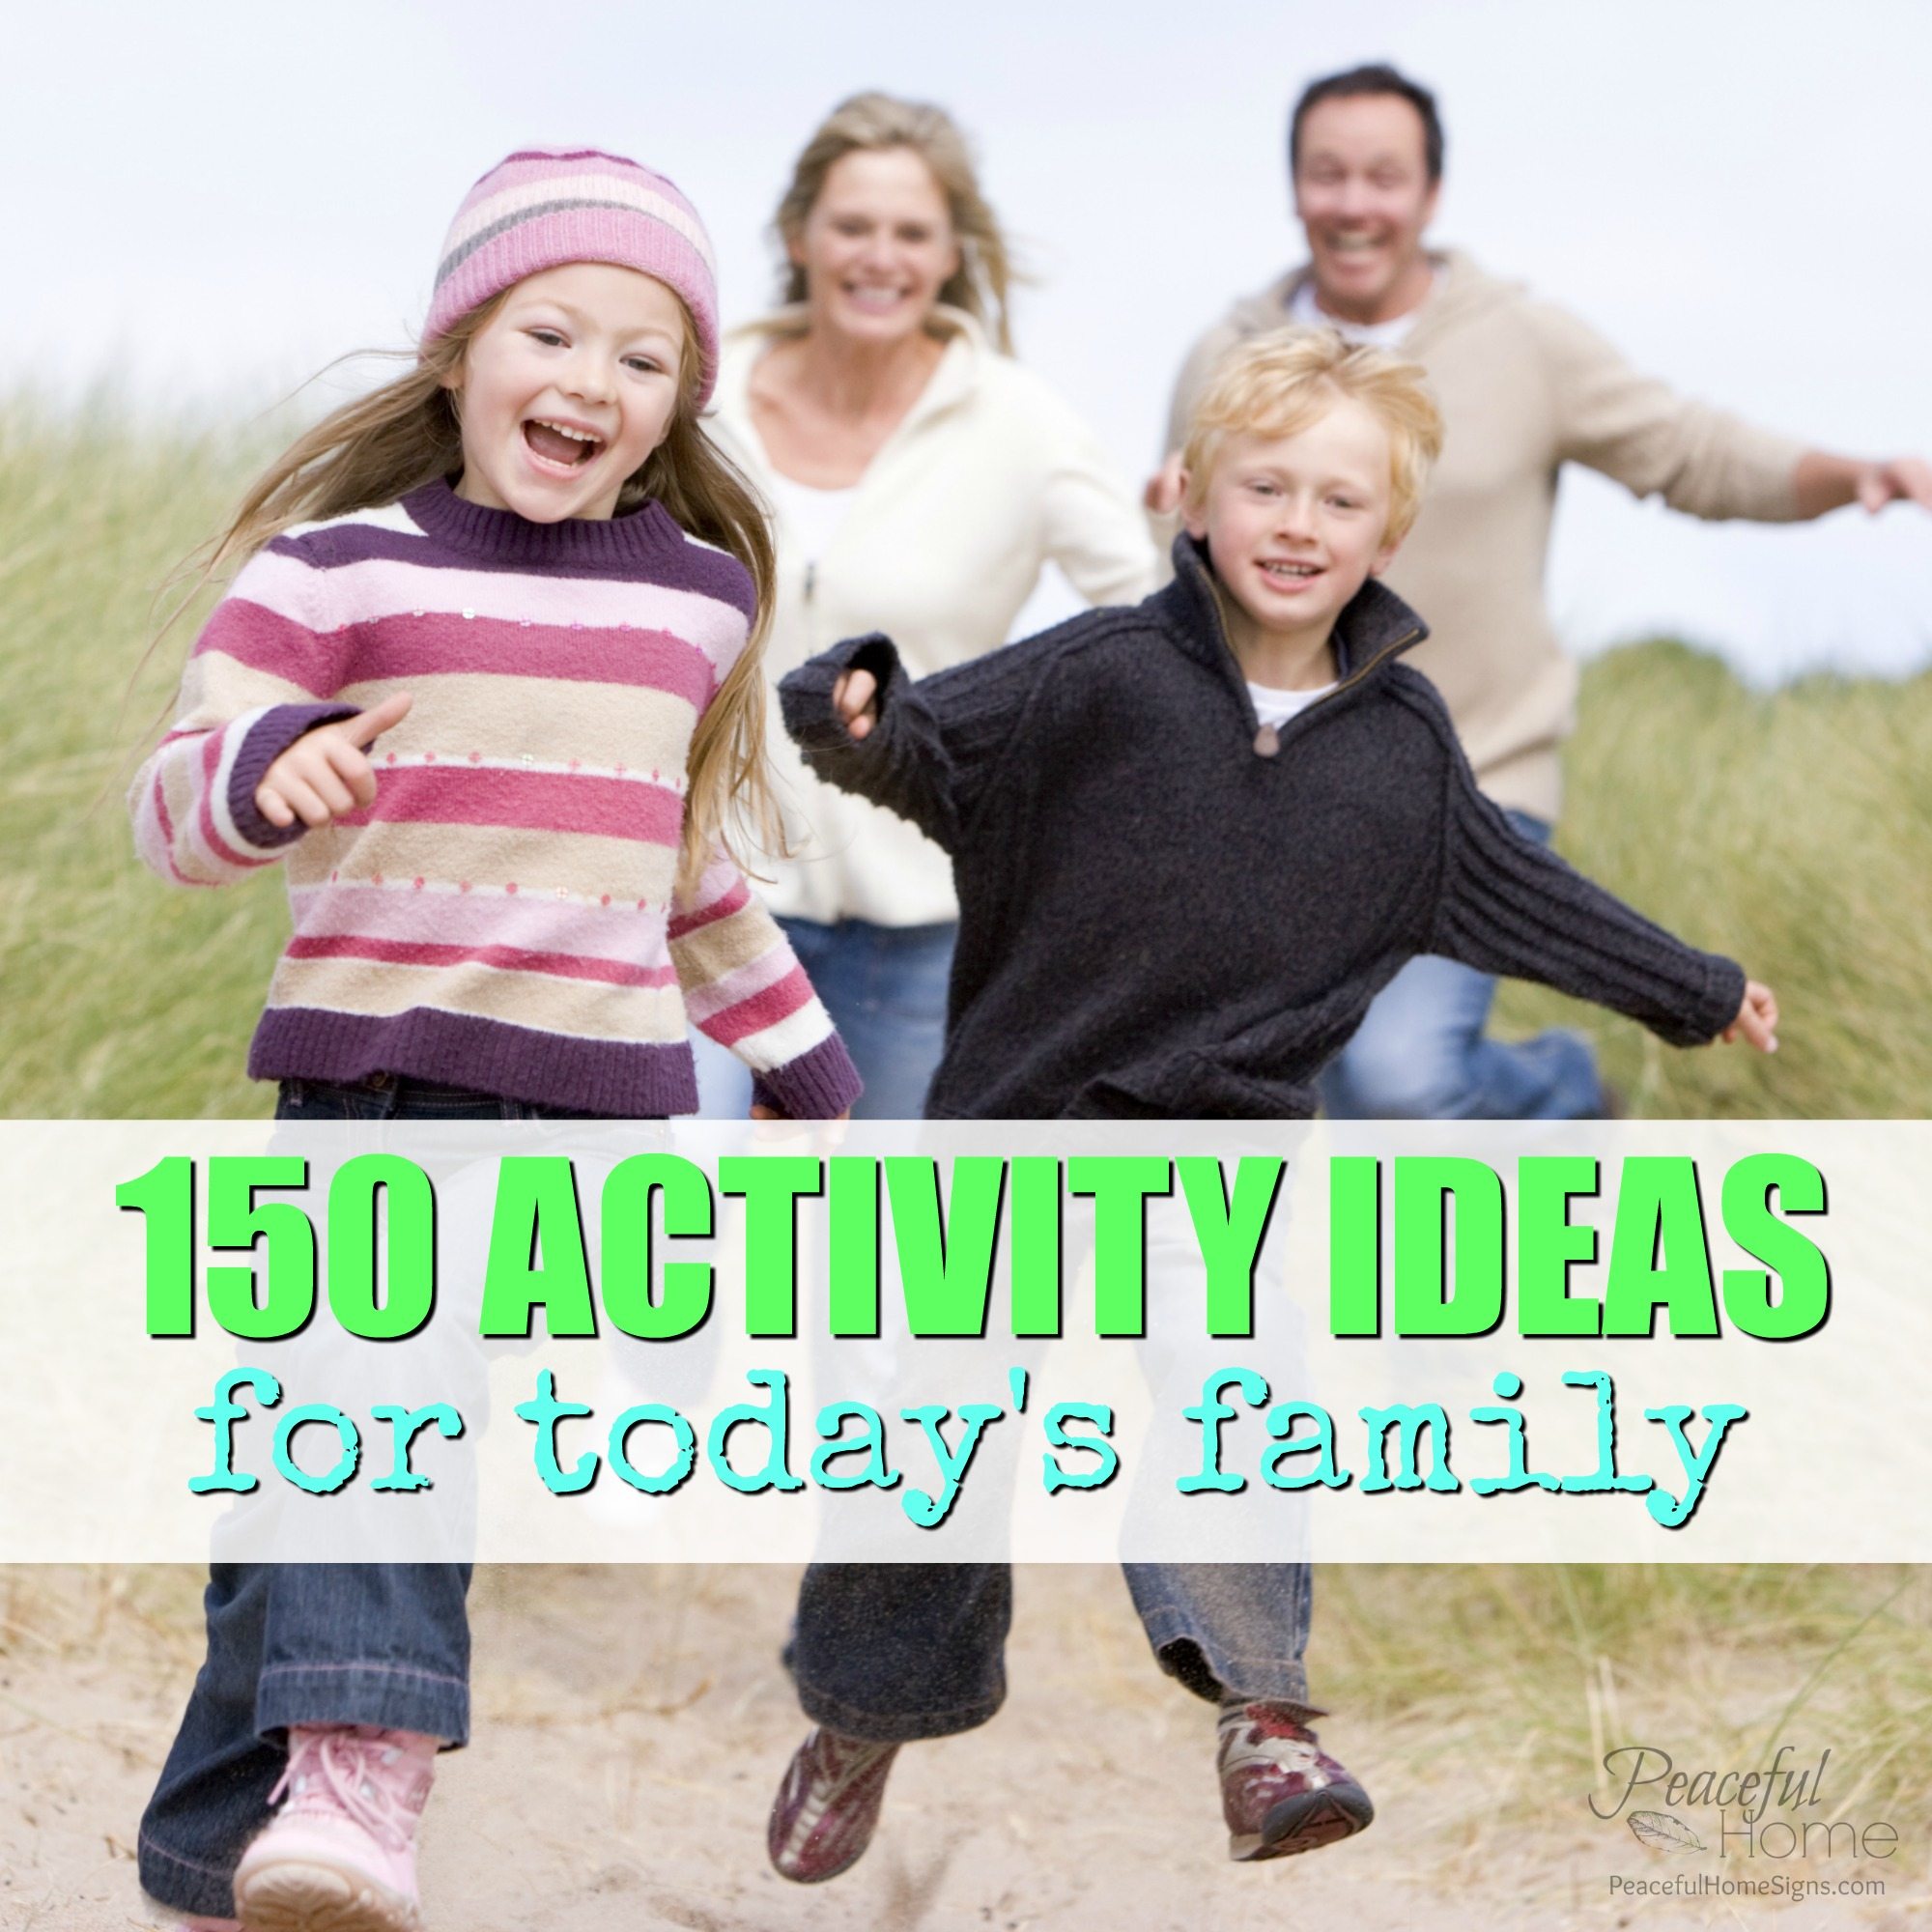 150 Activity Ideas for Today’s Family!